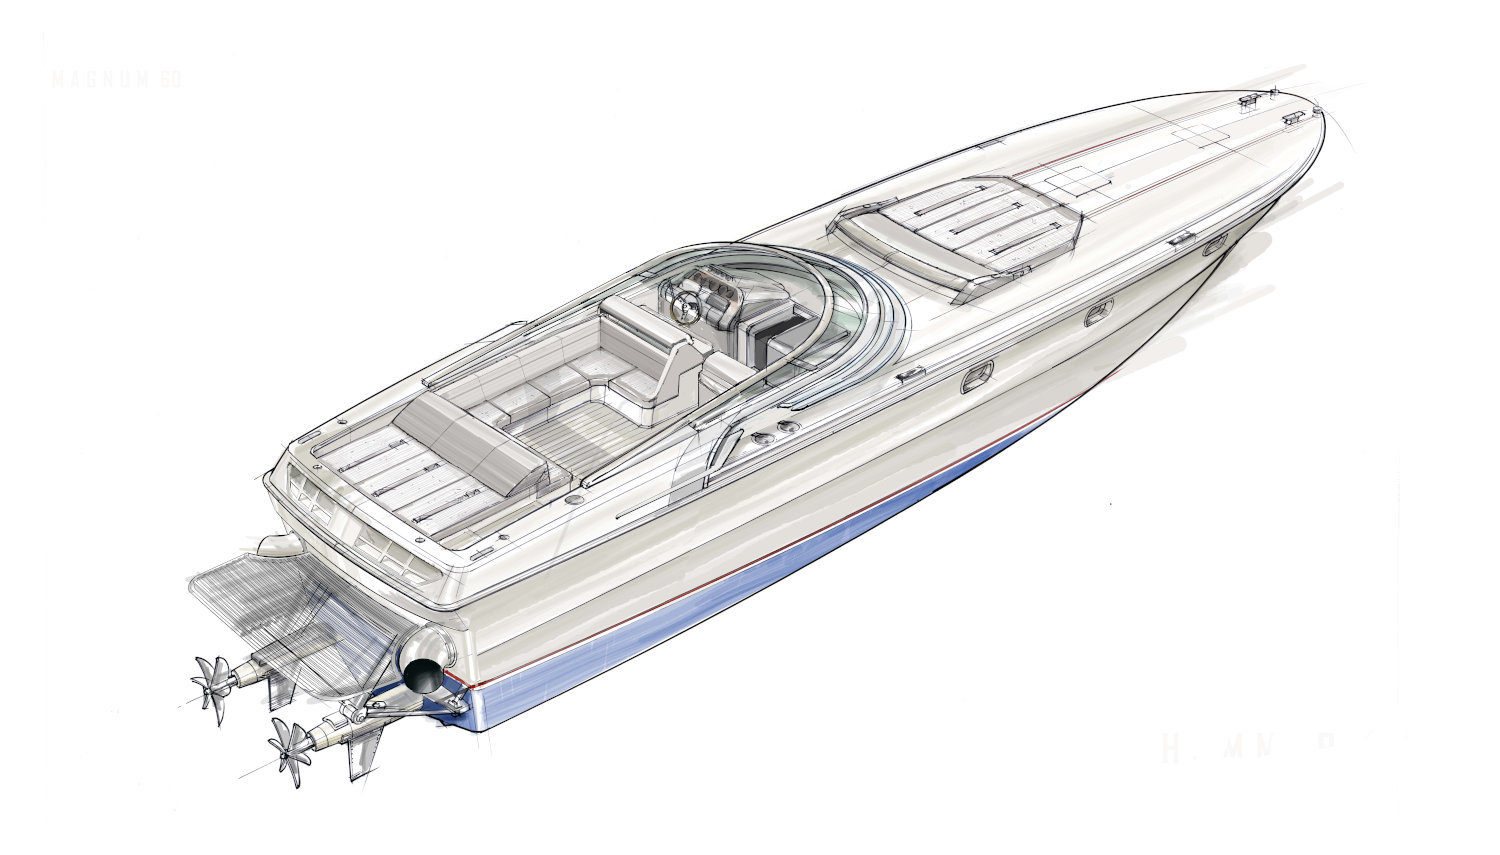 Vripack - Refit Hammer - Sketch of project Hammer - The racehorse of luxury leisure boats - Retro at it's best